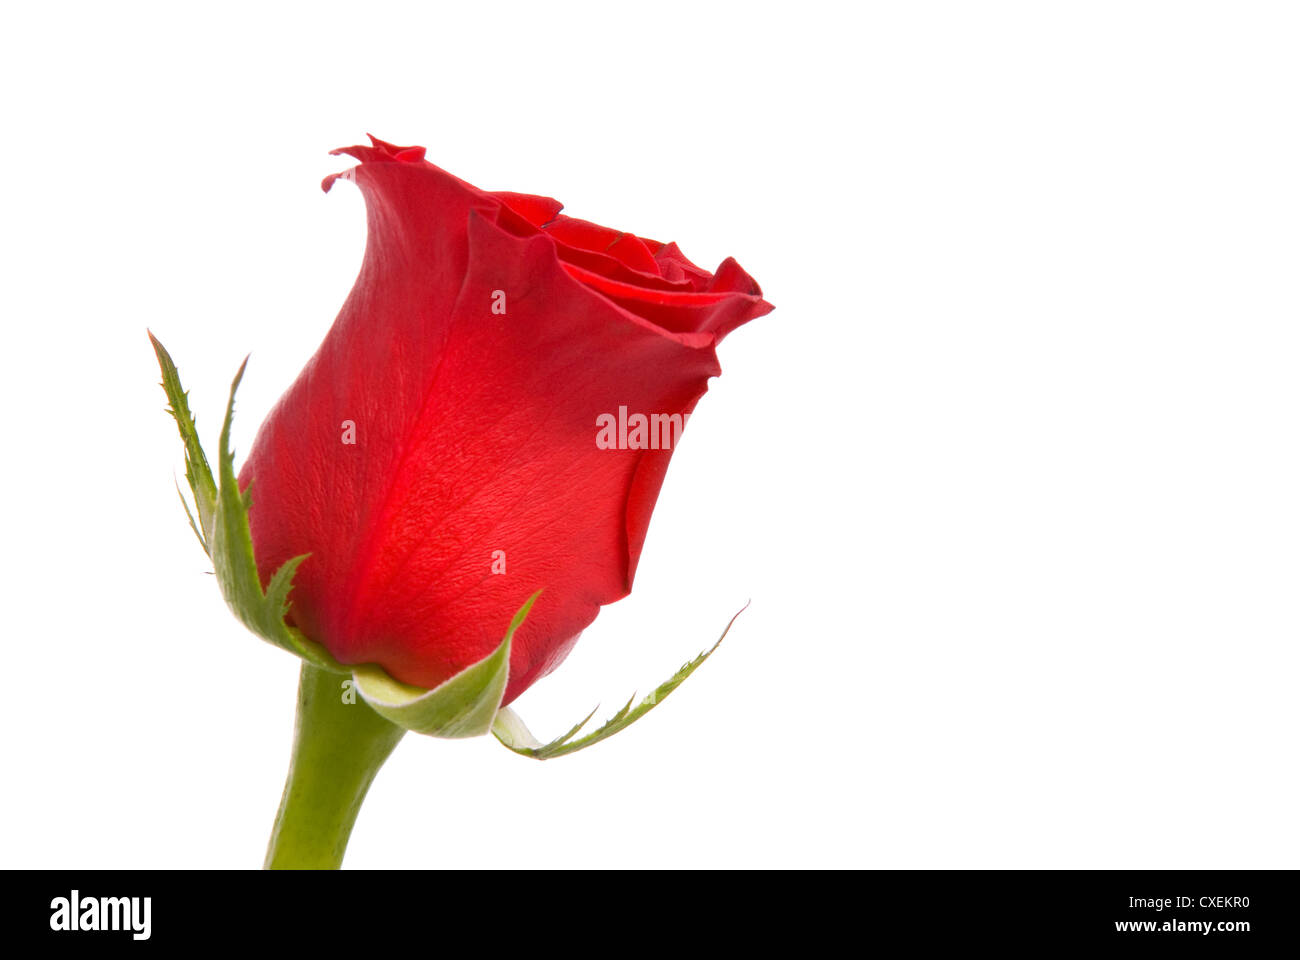 Red rose on a studio white background Stock Photo